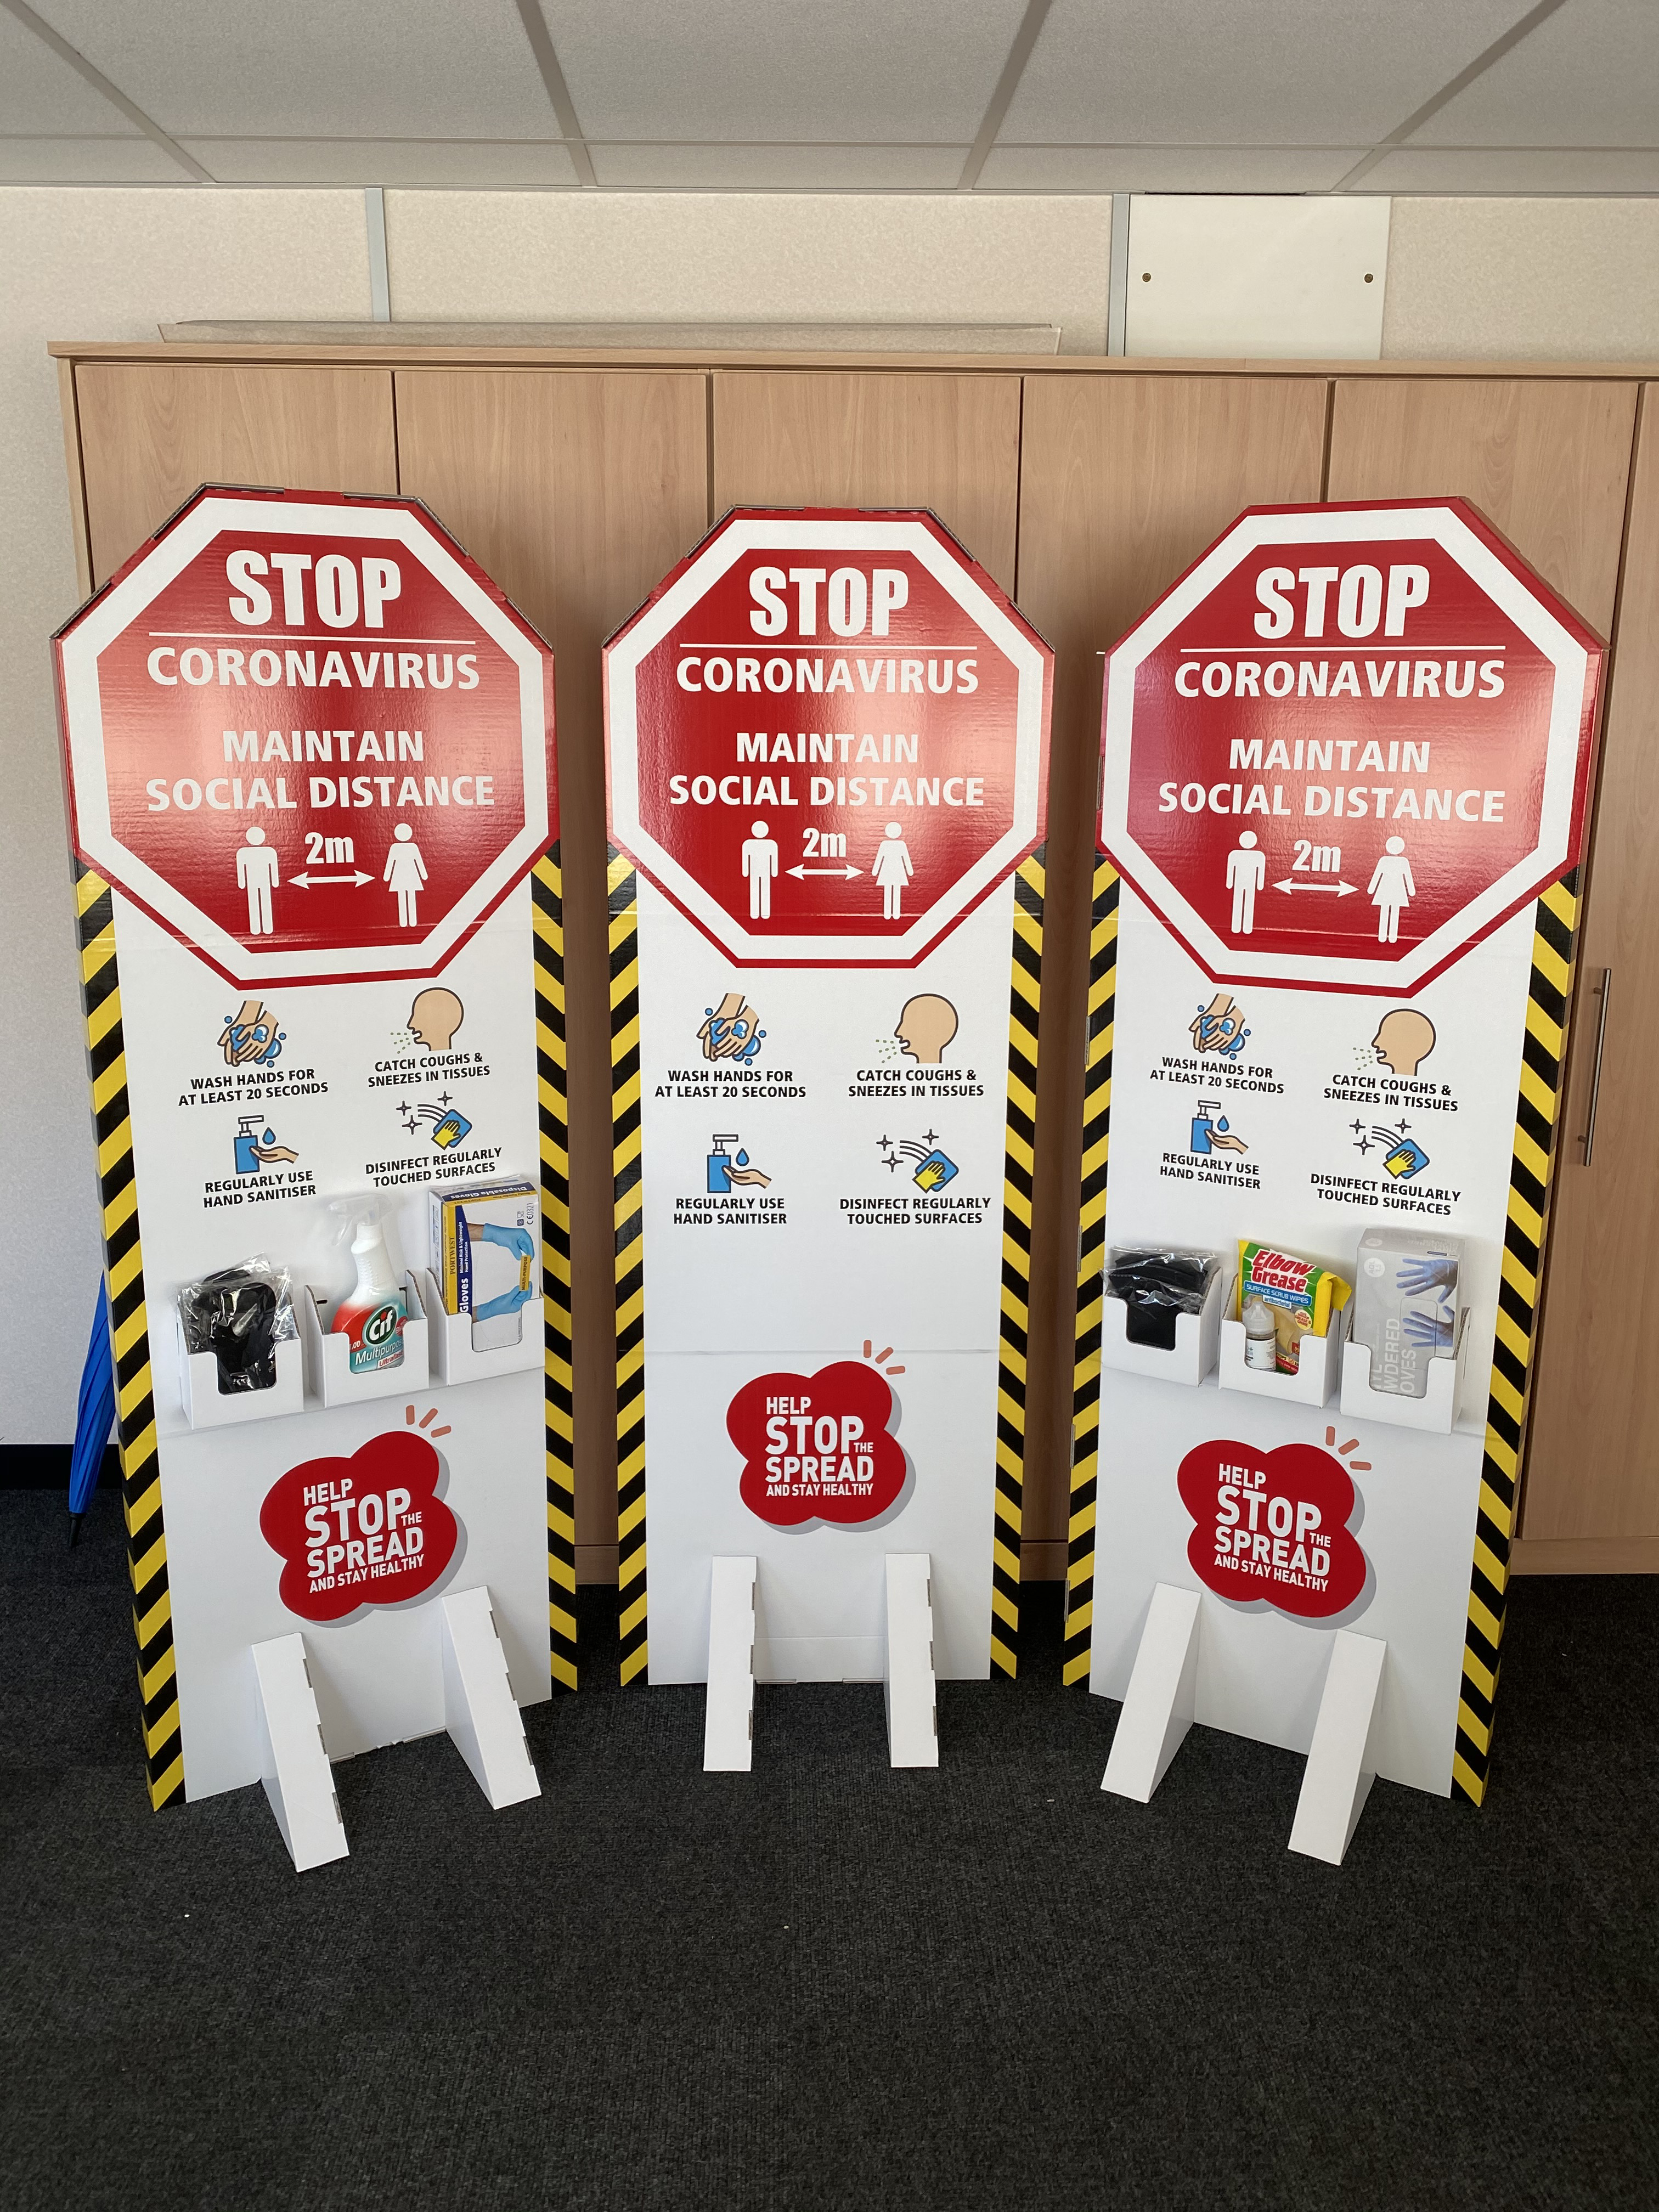 Above: The free standing display unit devised by N Smith to help communicate the important messages about safeguarding against the spread of the Covid-19 virus. 